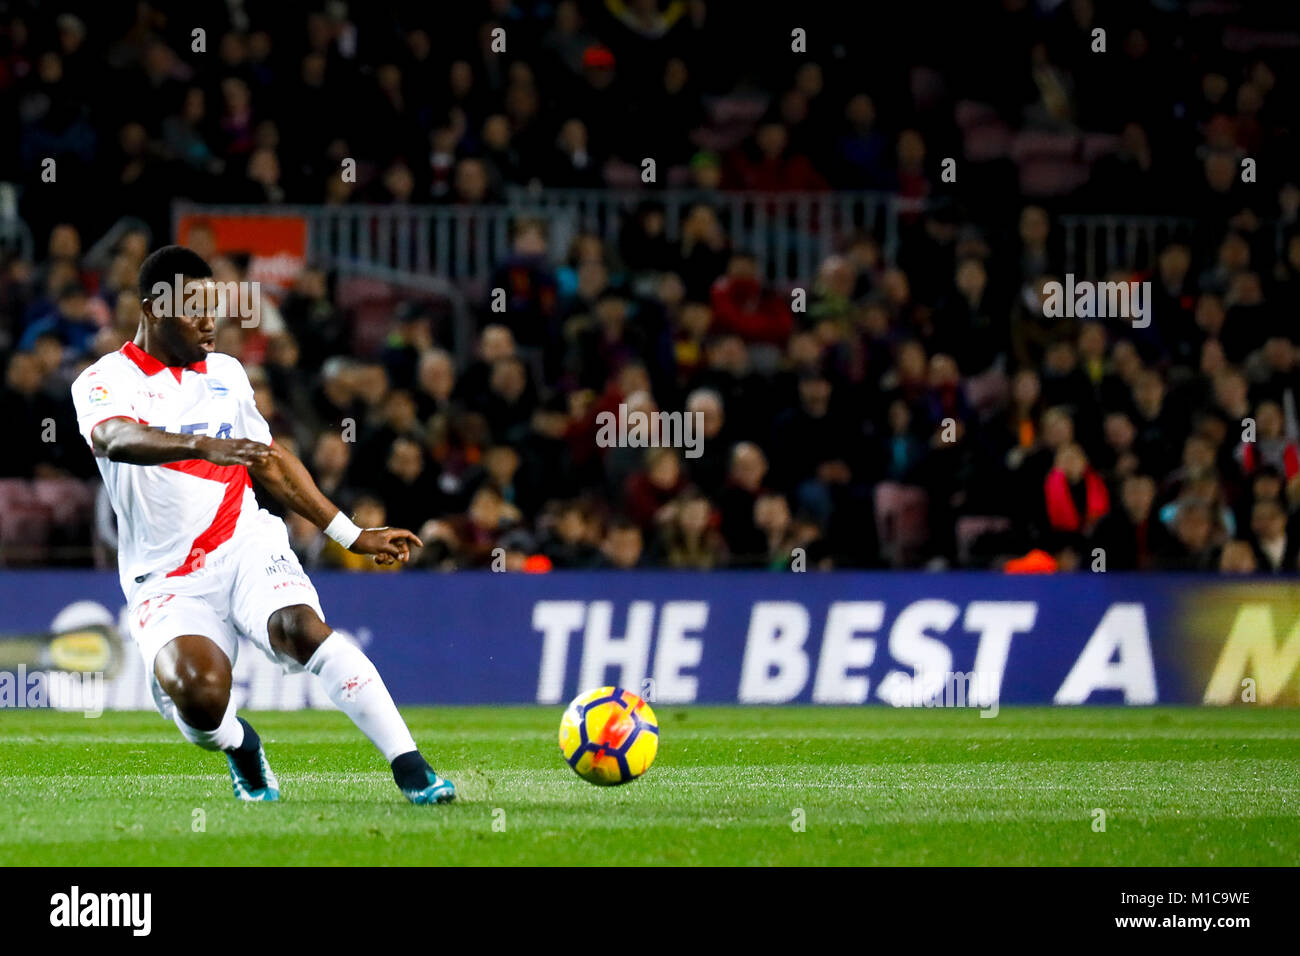 Camp Nou, Barcelona, Spain. 27th January, 2018. Mubarak Wakaso kicking the ball during the 21th round of La Liga 17/18 on the match between Fc Barcelona and Deportivo Alaves at Camp Nou, Barcelona, Spain. Credit: G. Loinaz. Credit: G. Loinaz/Alamy Live News Stock Photo